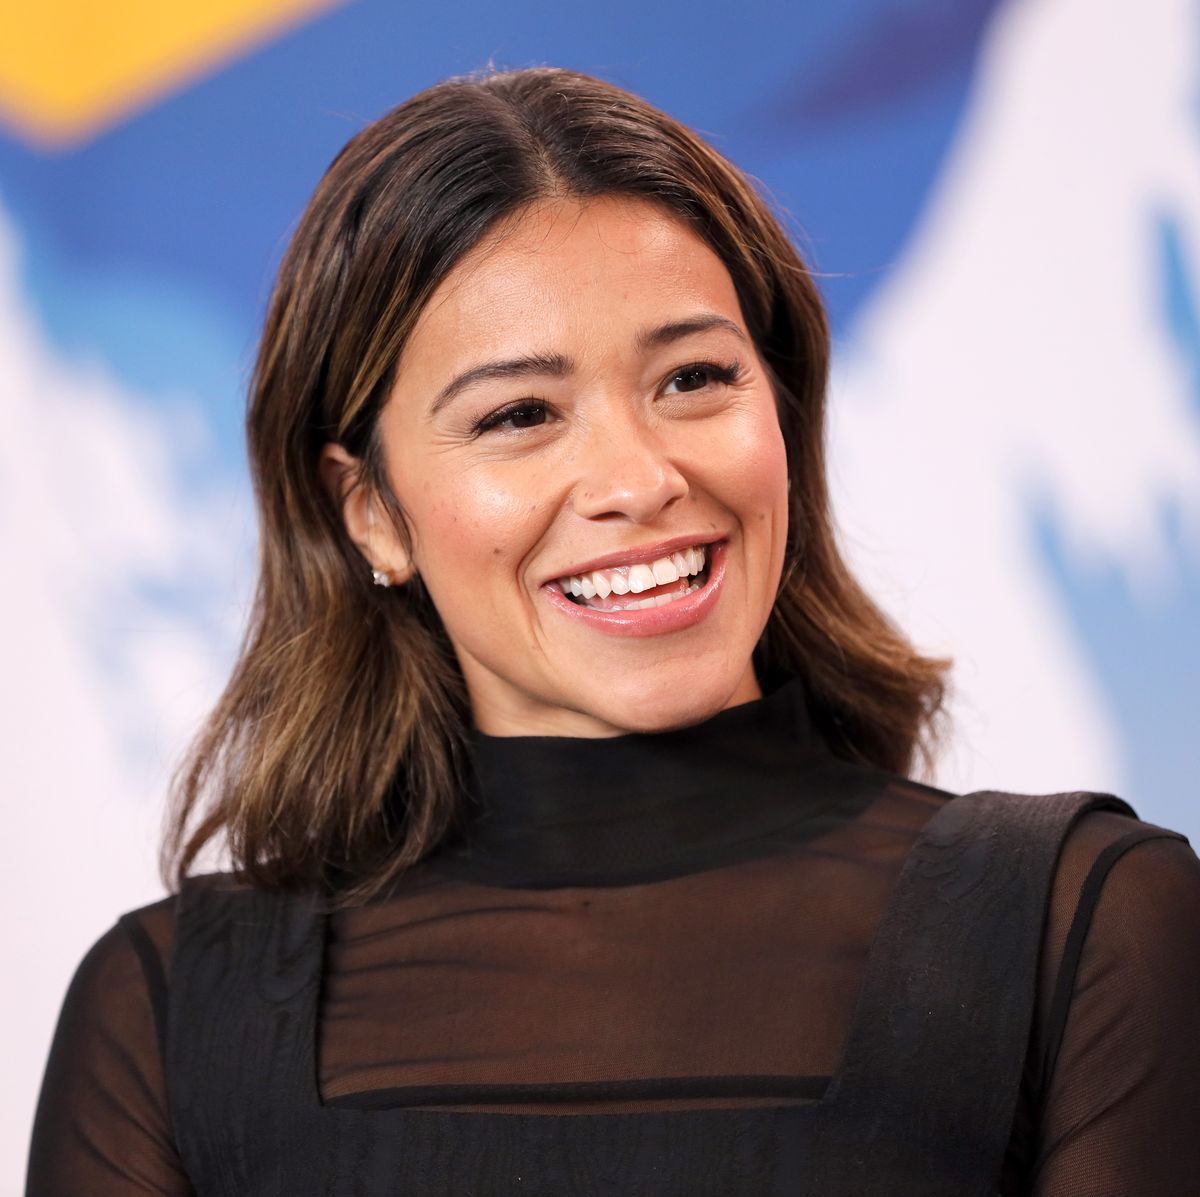 The Bold and the Beautiful alum Gina Rodriguez cast in Netflix rom